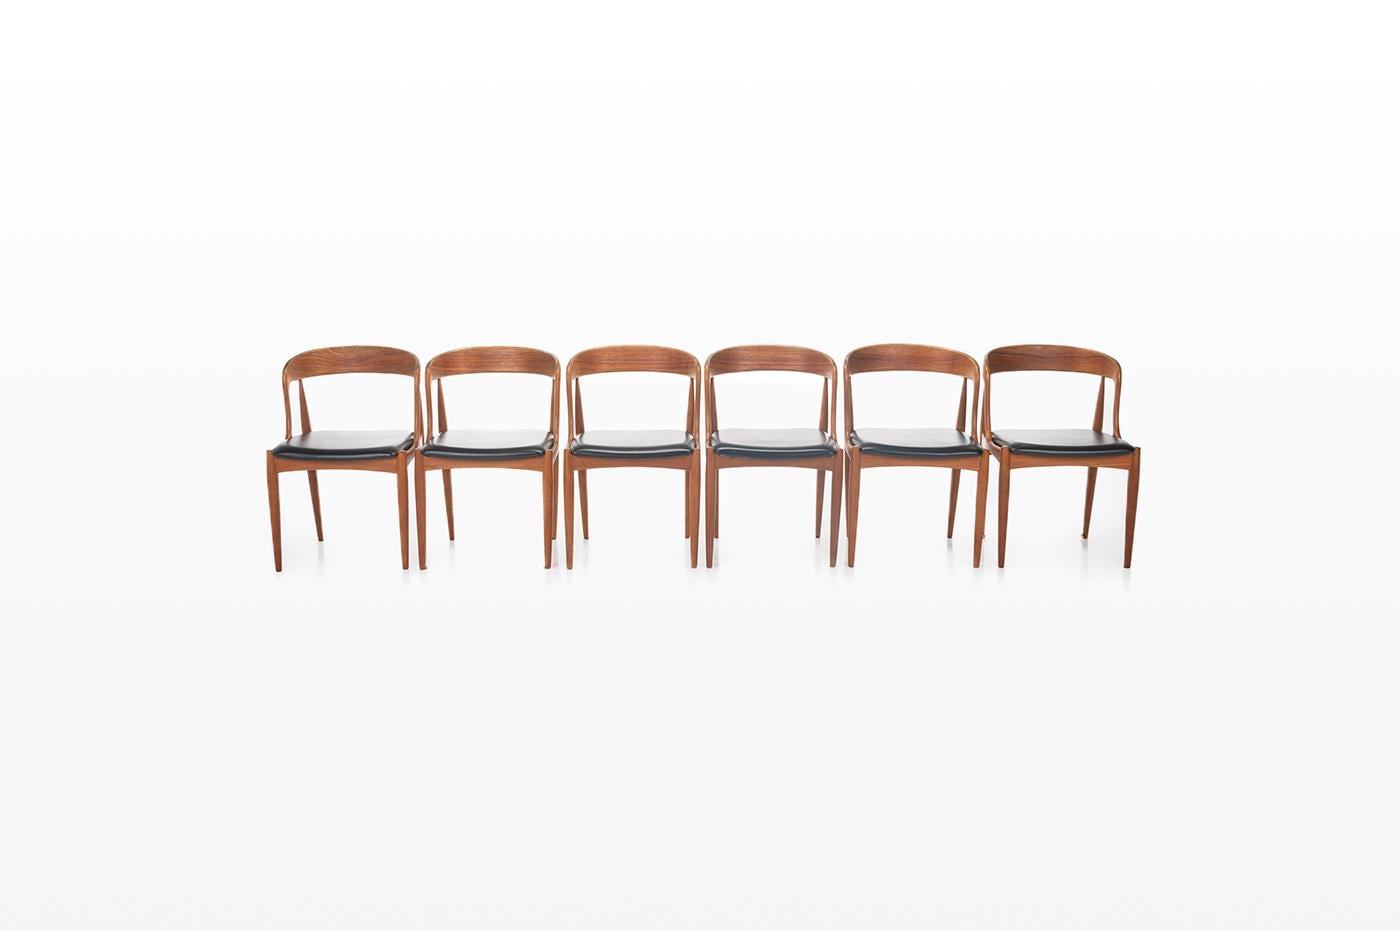 Set of 6 vintage dining room chairs. These chairs are designed by Johannes Andersen for Uldum Møbelfabrik in Denmark. They have a teak frame and the black seating.